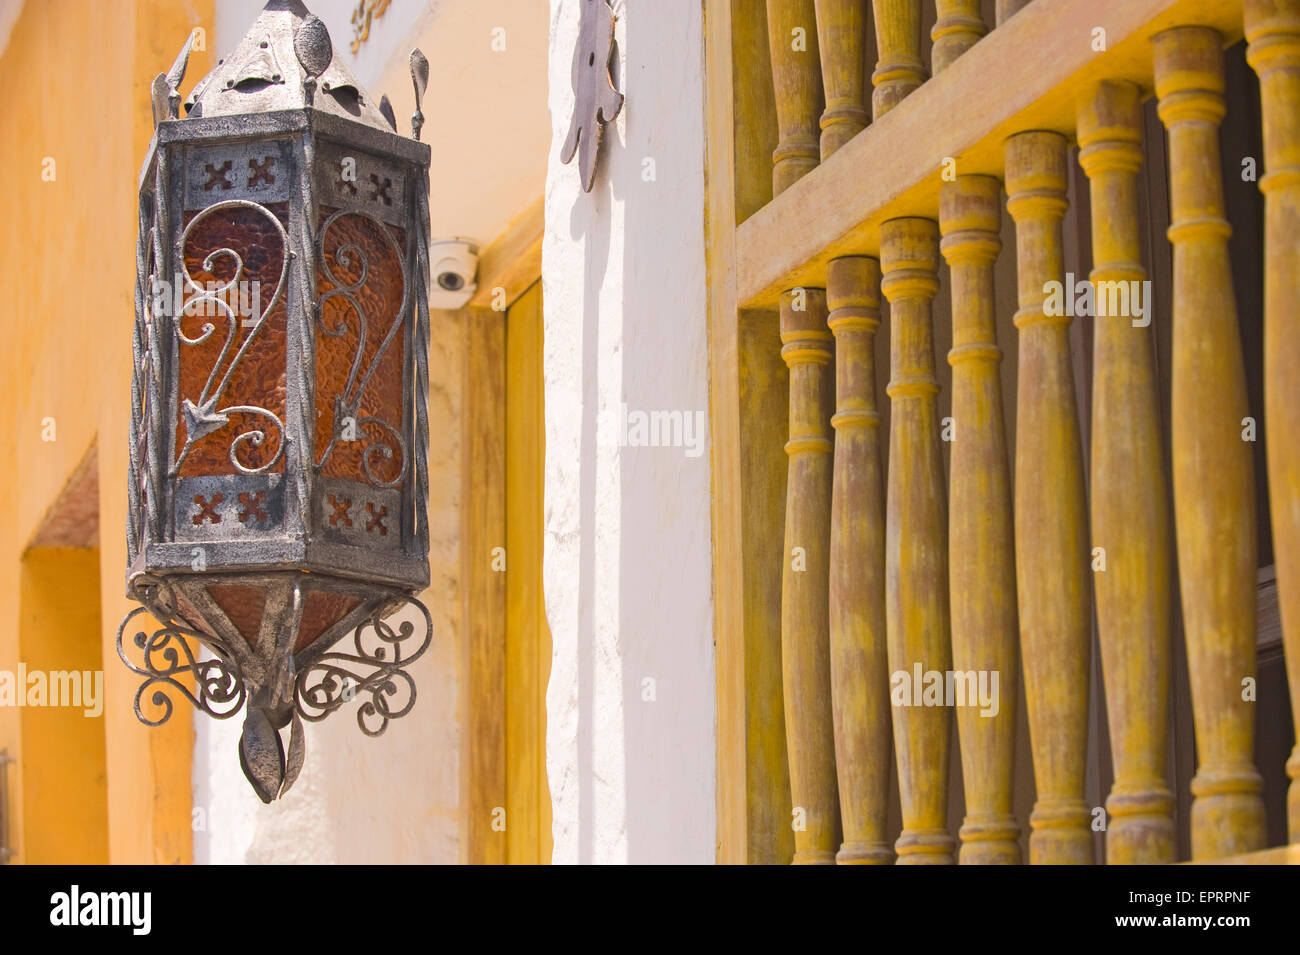 An intricate lamp outside a window, typical of the style in Cartagena, Colombia, South America Stock Photo